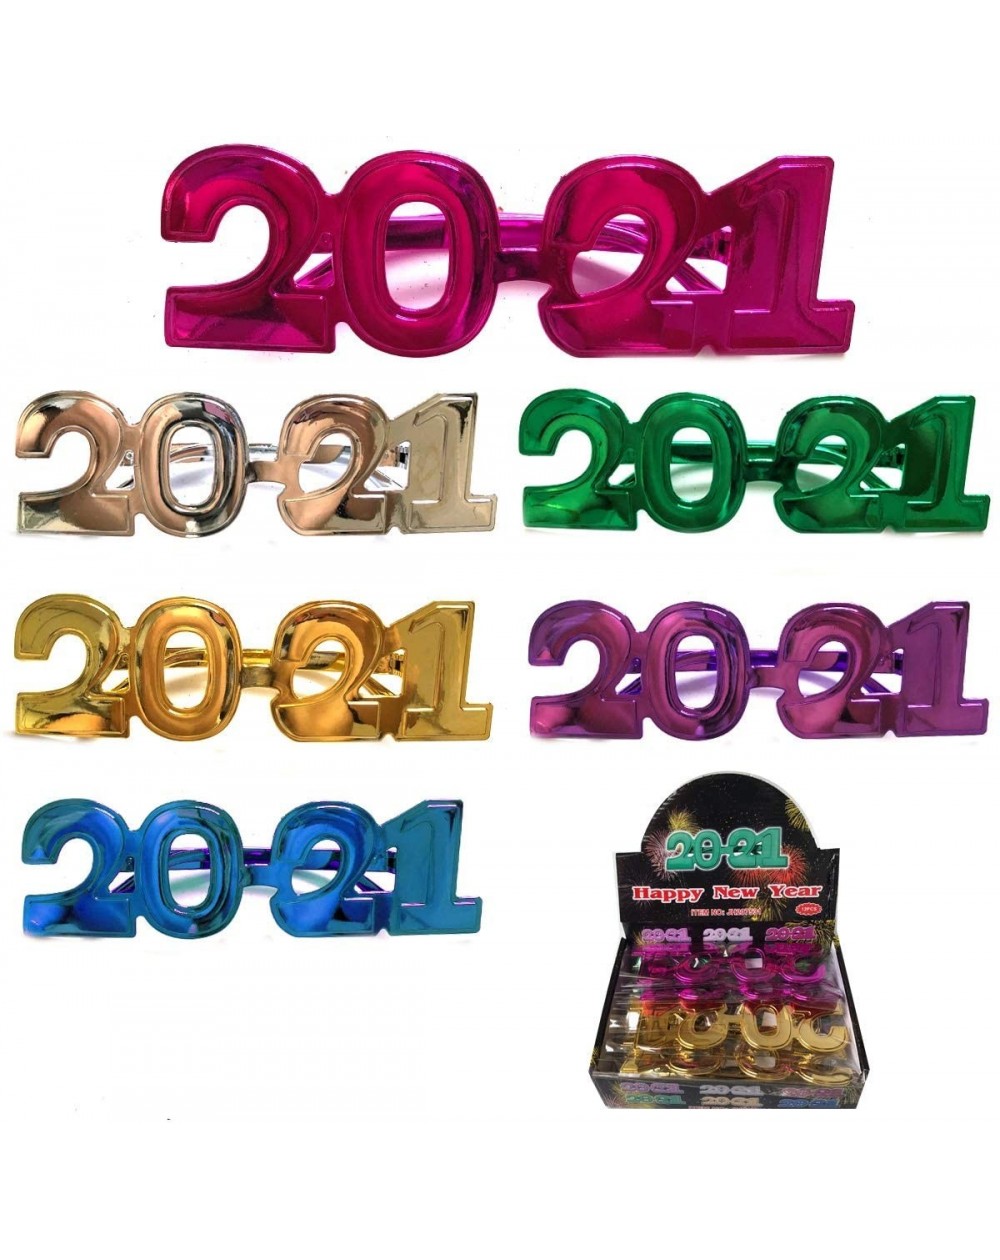 Favors Pack of 12 Novelty 2021 Shaped New Year's Eve Props Party Favor Plastic Flame Glasses - CD18Y328UCW $14.79